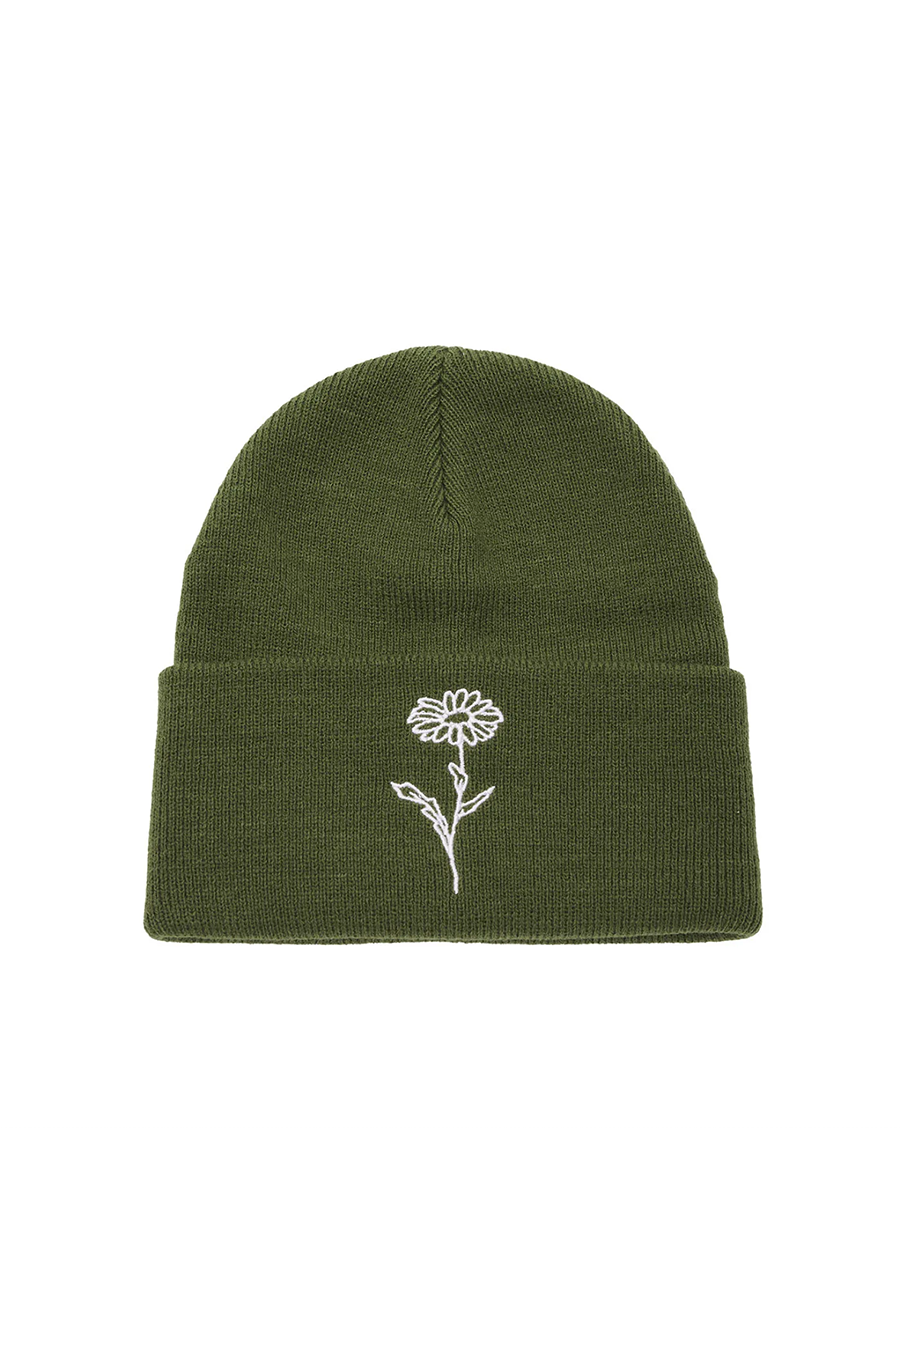 Flower Beanie | Army - Main Image Number 1 of 3